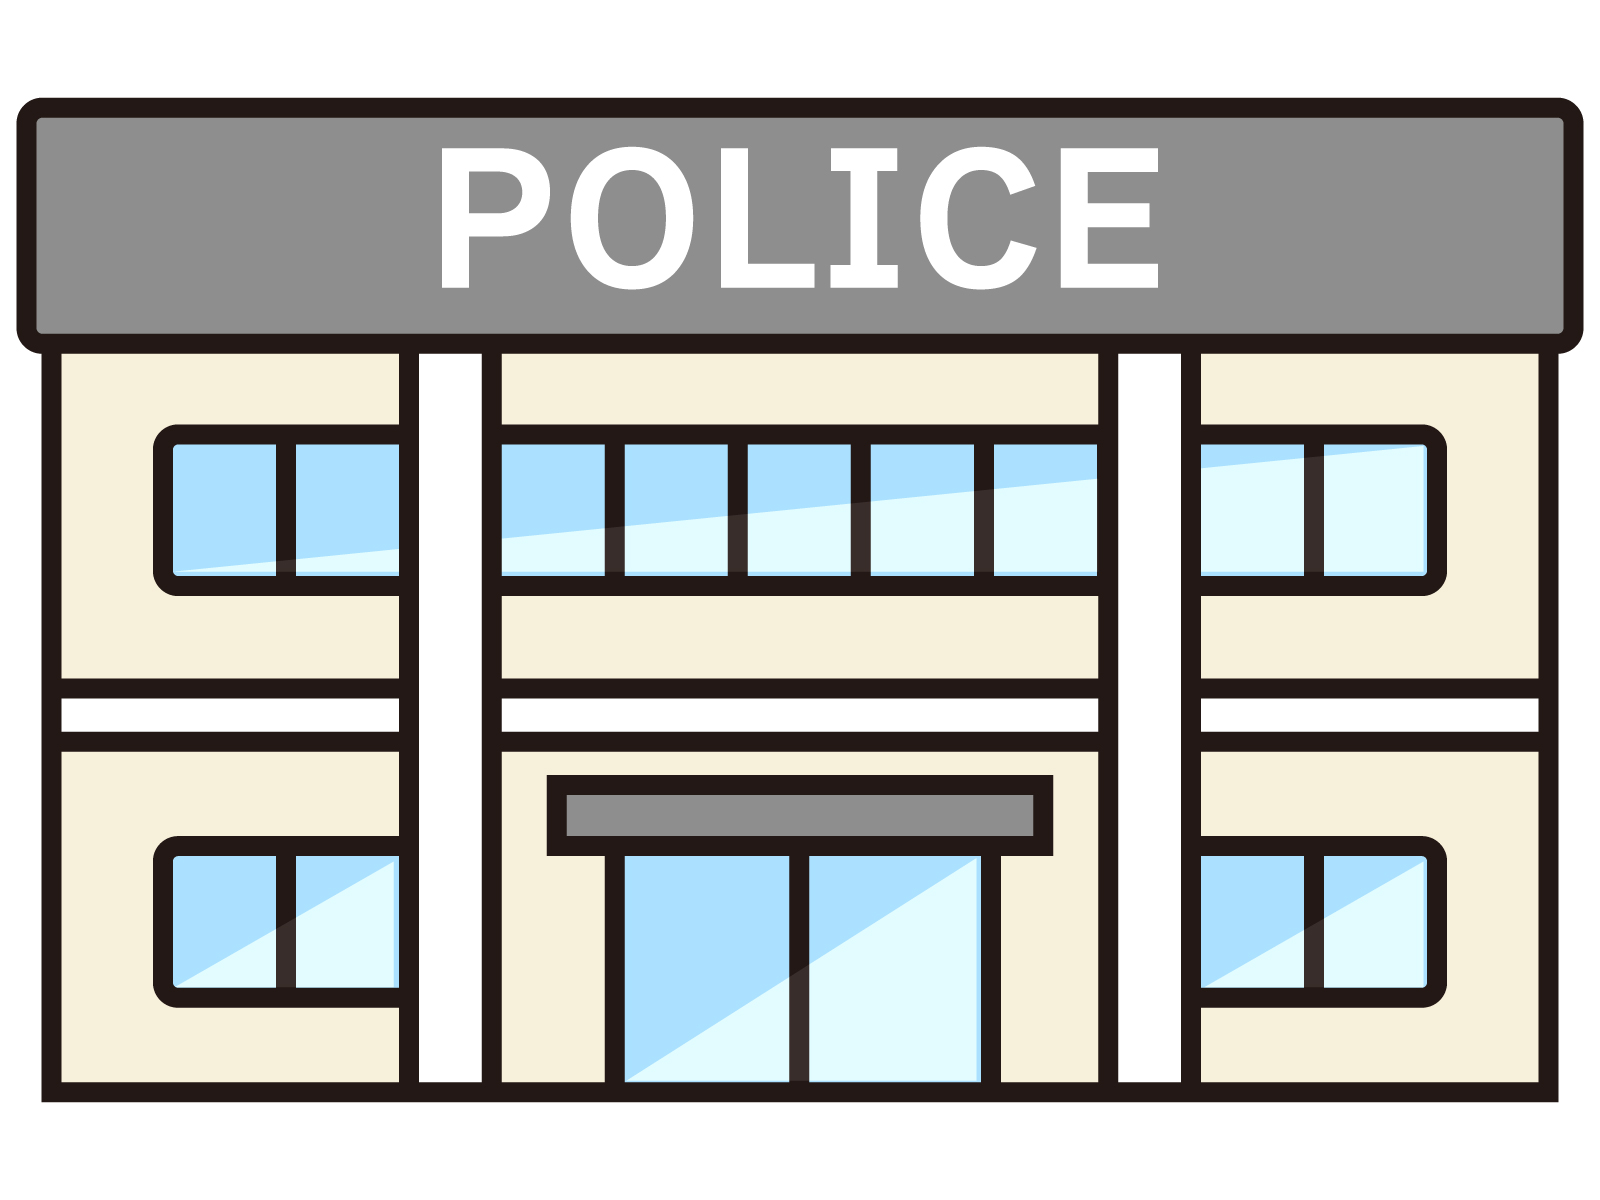 Policeのイラスト